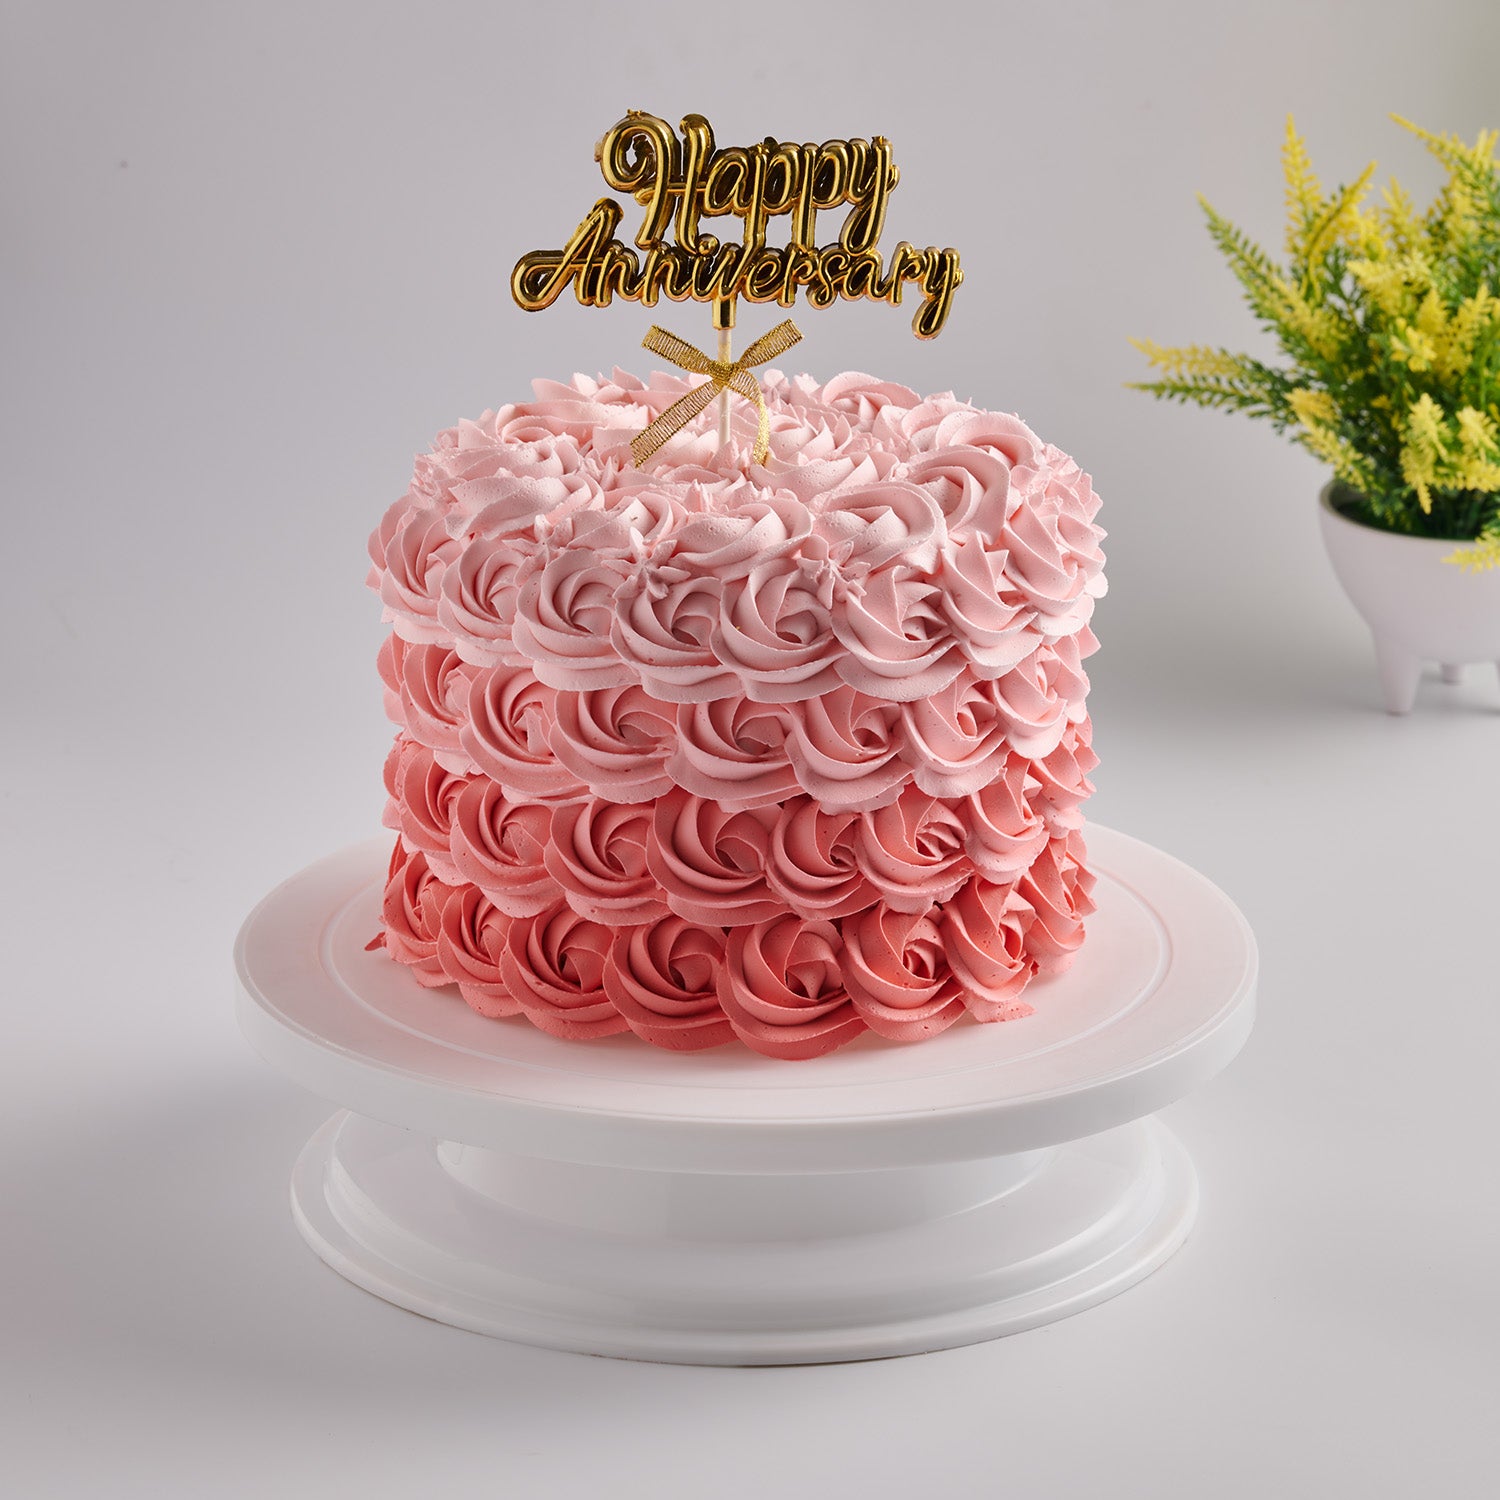 Engagement special cake 3 kg | Best birthday cake designs, Cake, Special  cake